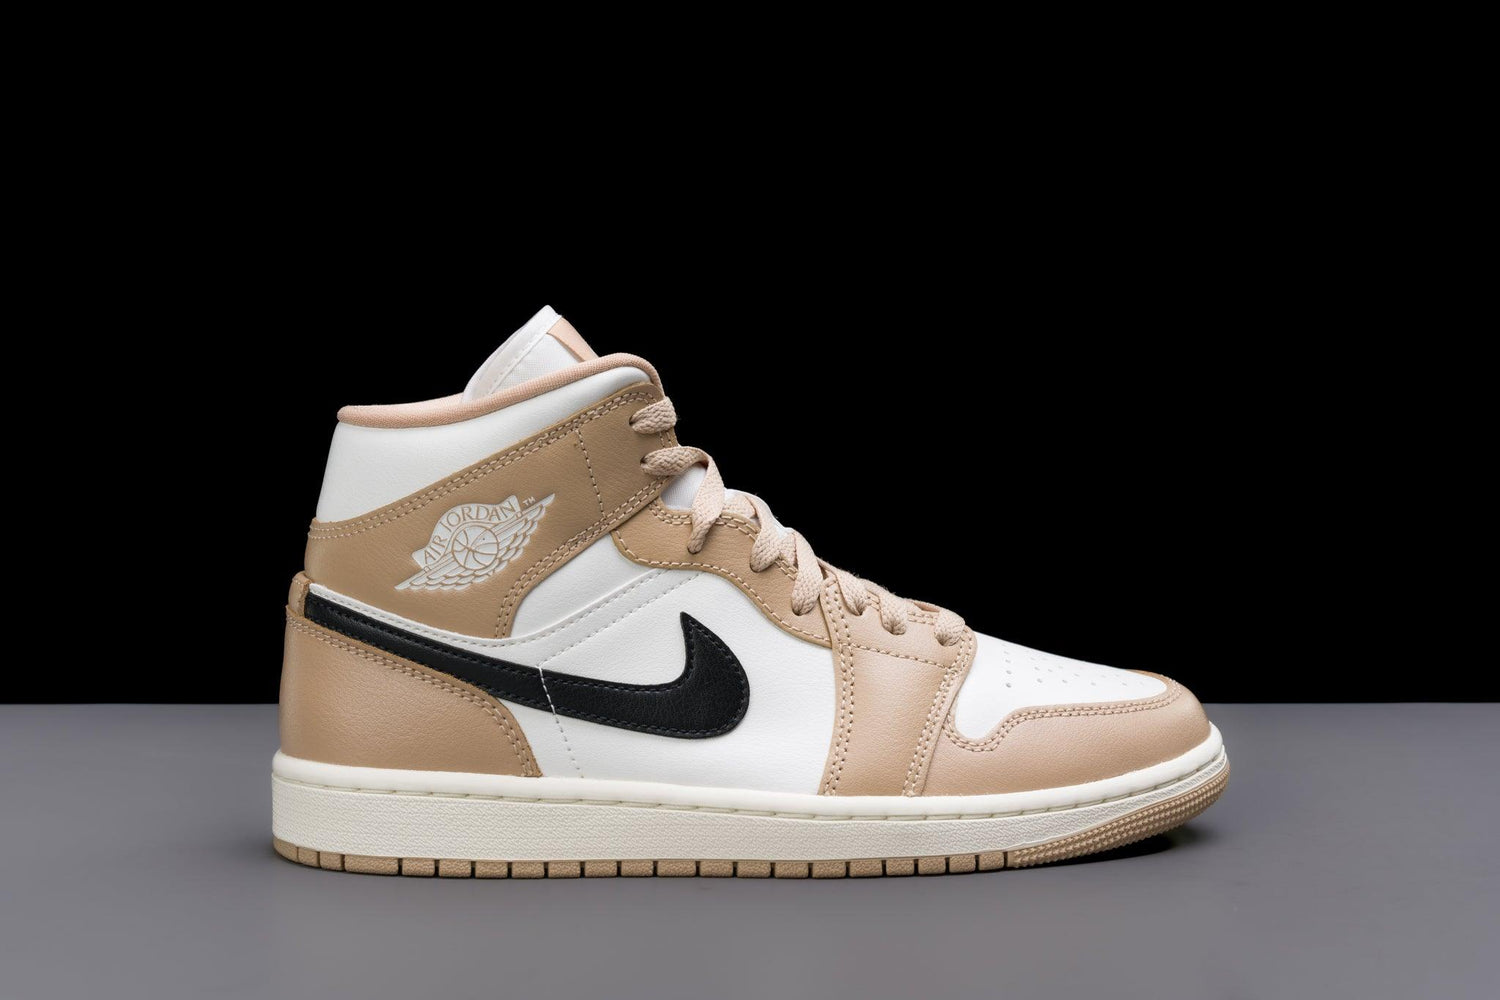 The experimental Jordan 1 High is currently only listed at Mid WMNS 'Desert' - Urlfreeze Shop